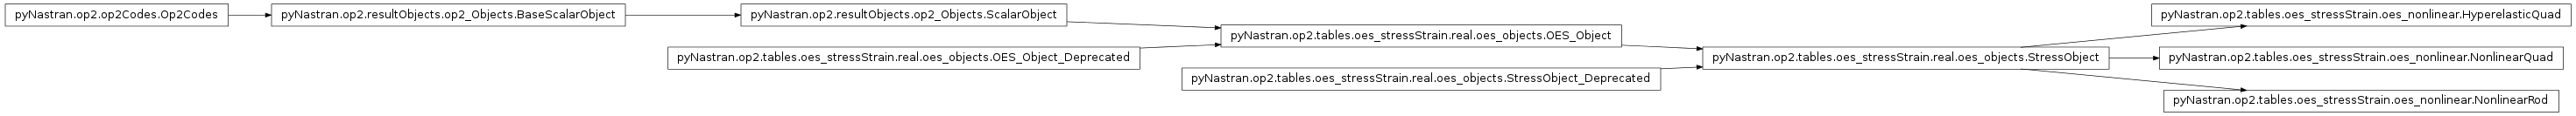 Inheritance diagram of pyNastran.op2.tables.oes_stressStrain.oes_nonlinear